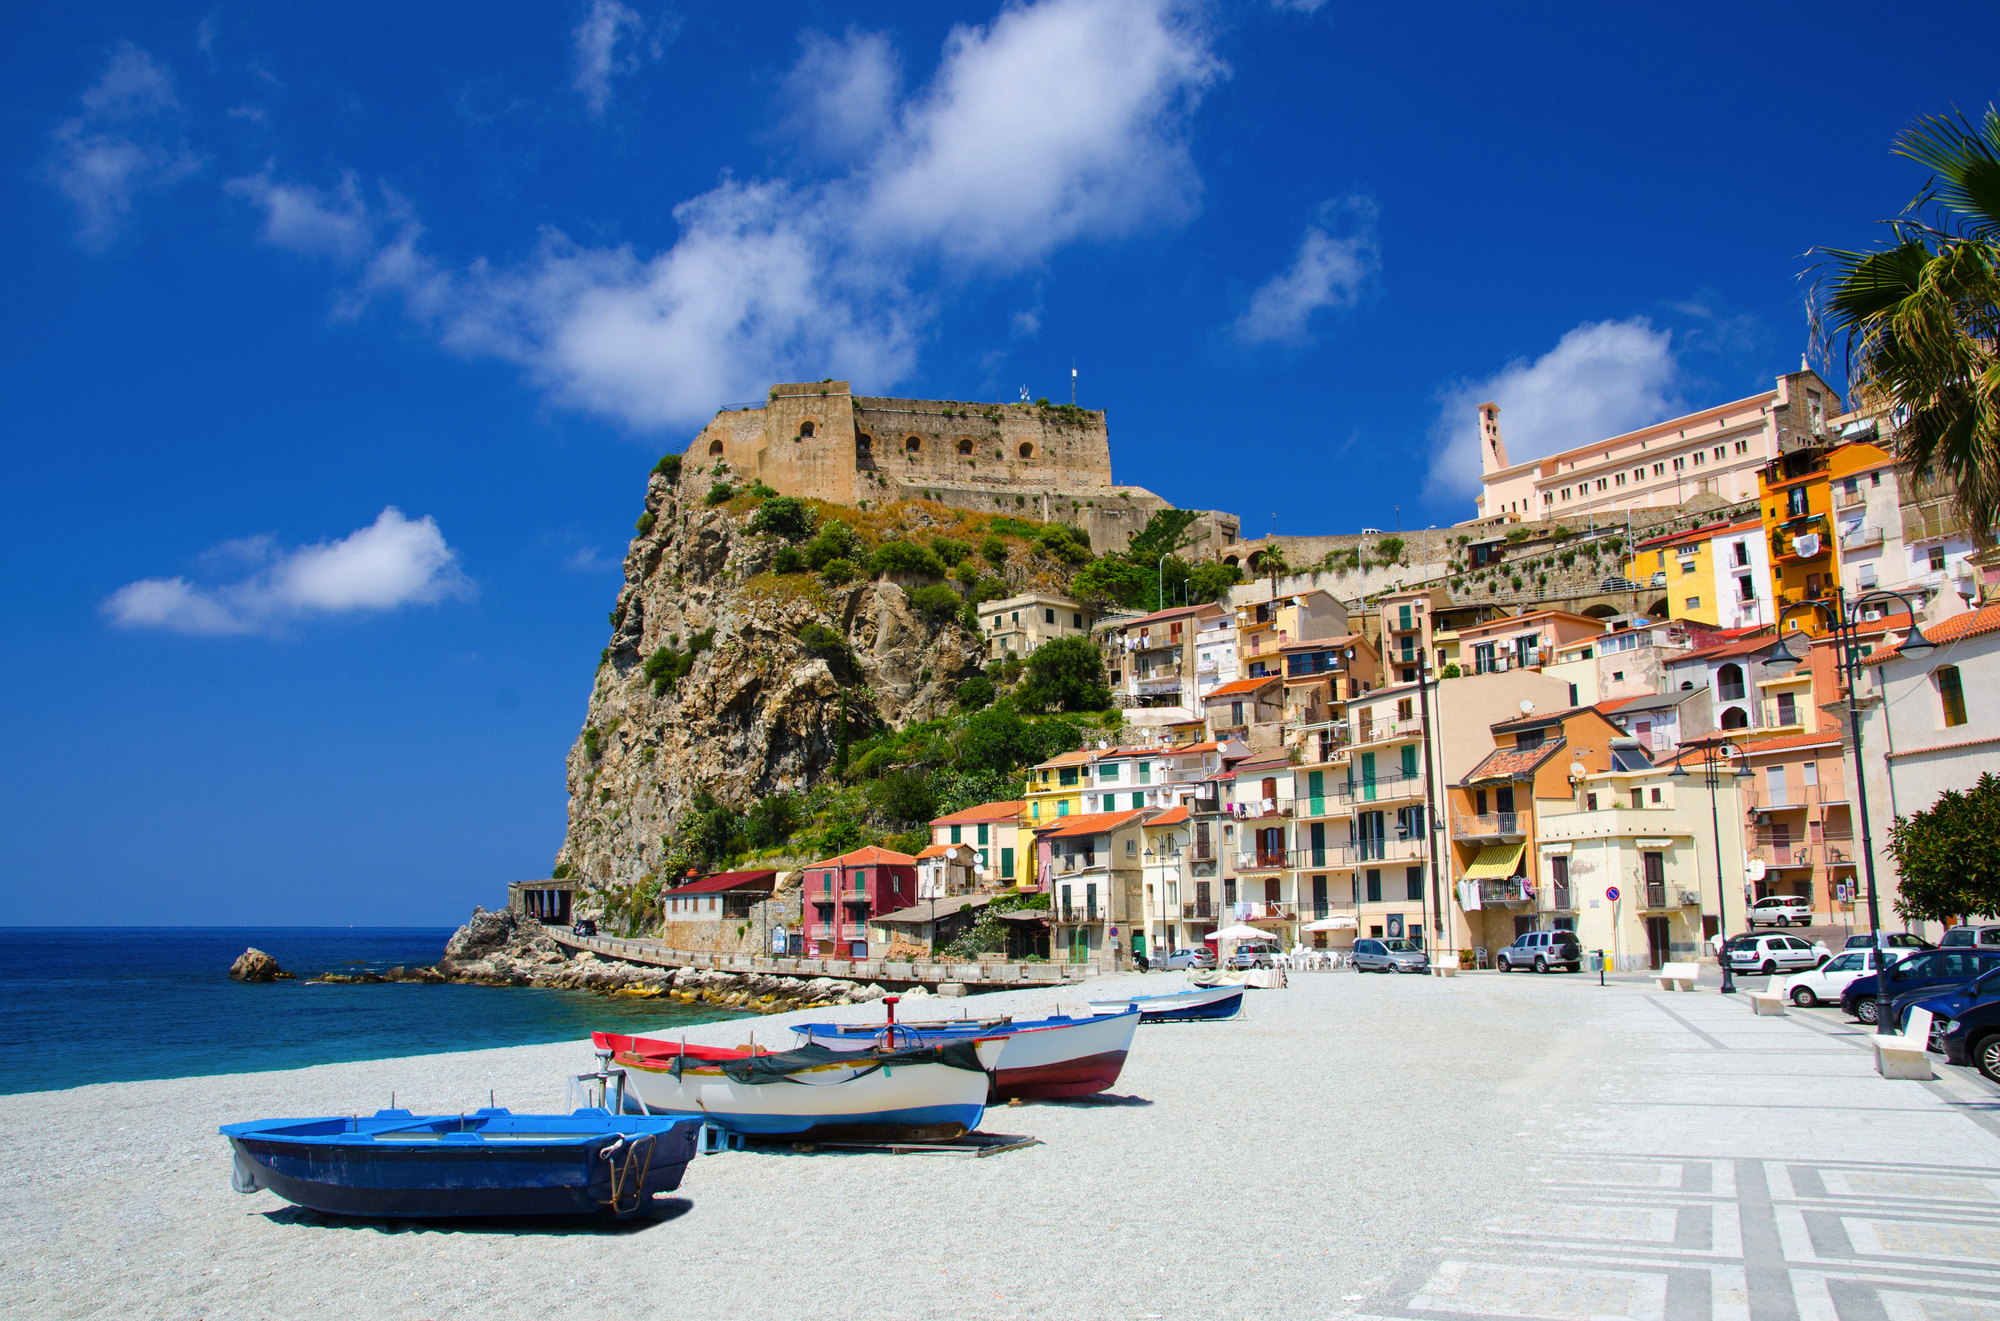 Fishing colorful boats on sandy beach of Tyrrhenian sea coast shore of beautiful seaside town Scilla with traditional houses and old medieval castle on rock Castello Ruffo, Calabria, Southern Italy